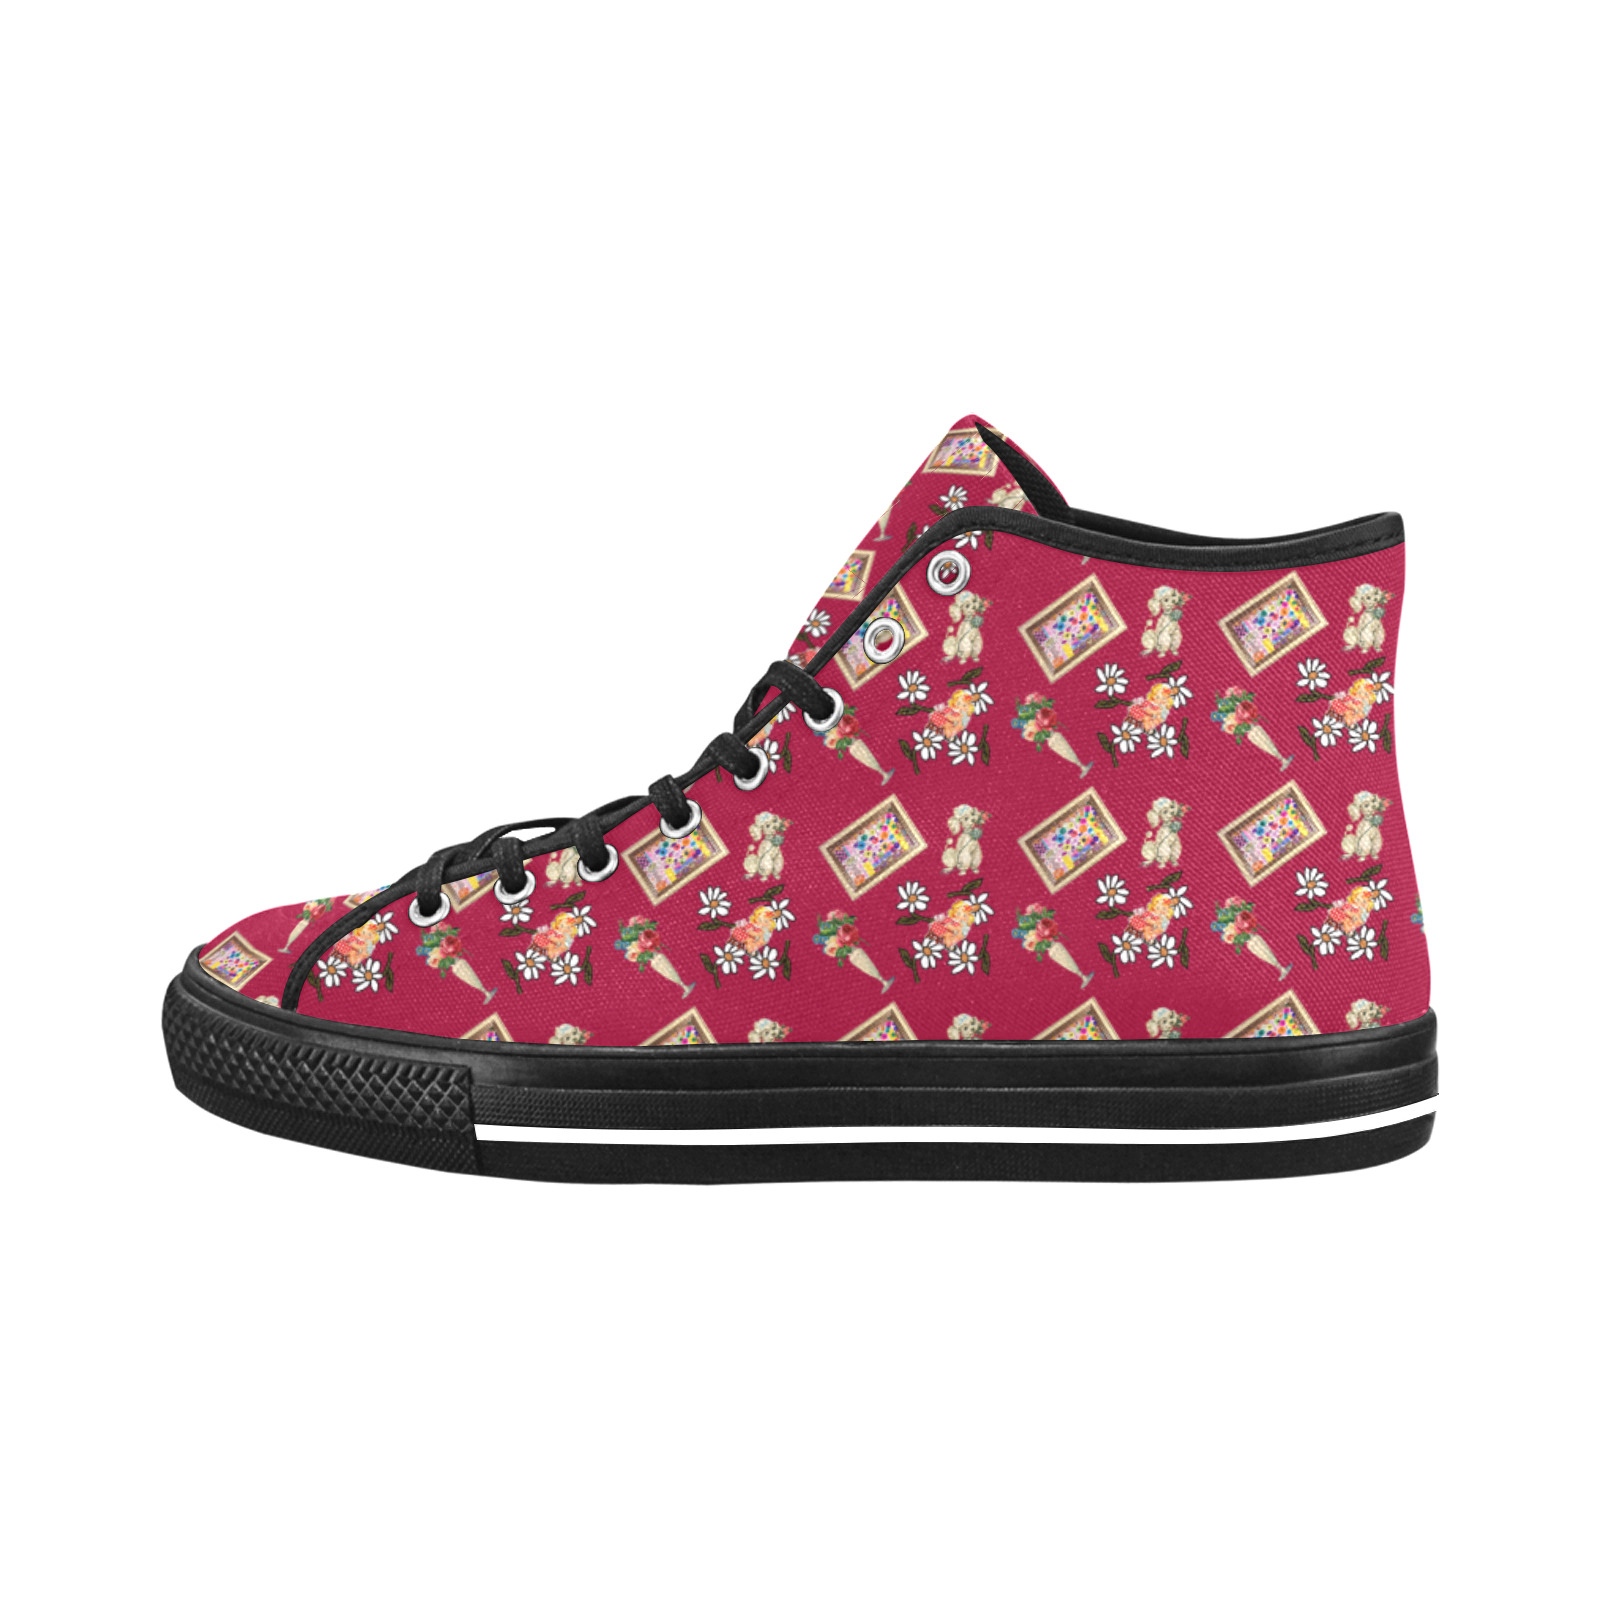 robin art red pattern Vancouver H Women's Canvas Shoes (1013-1)